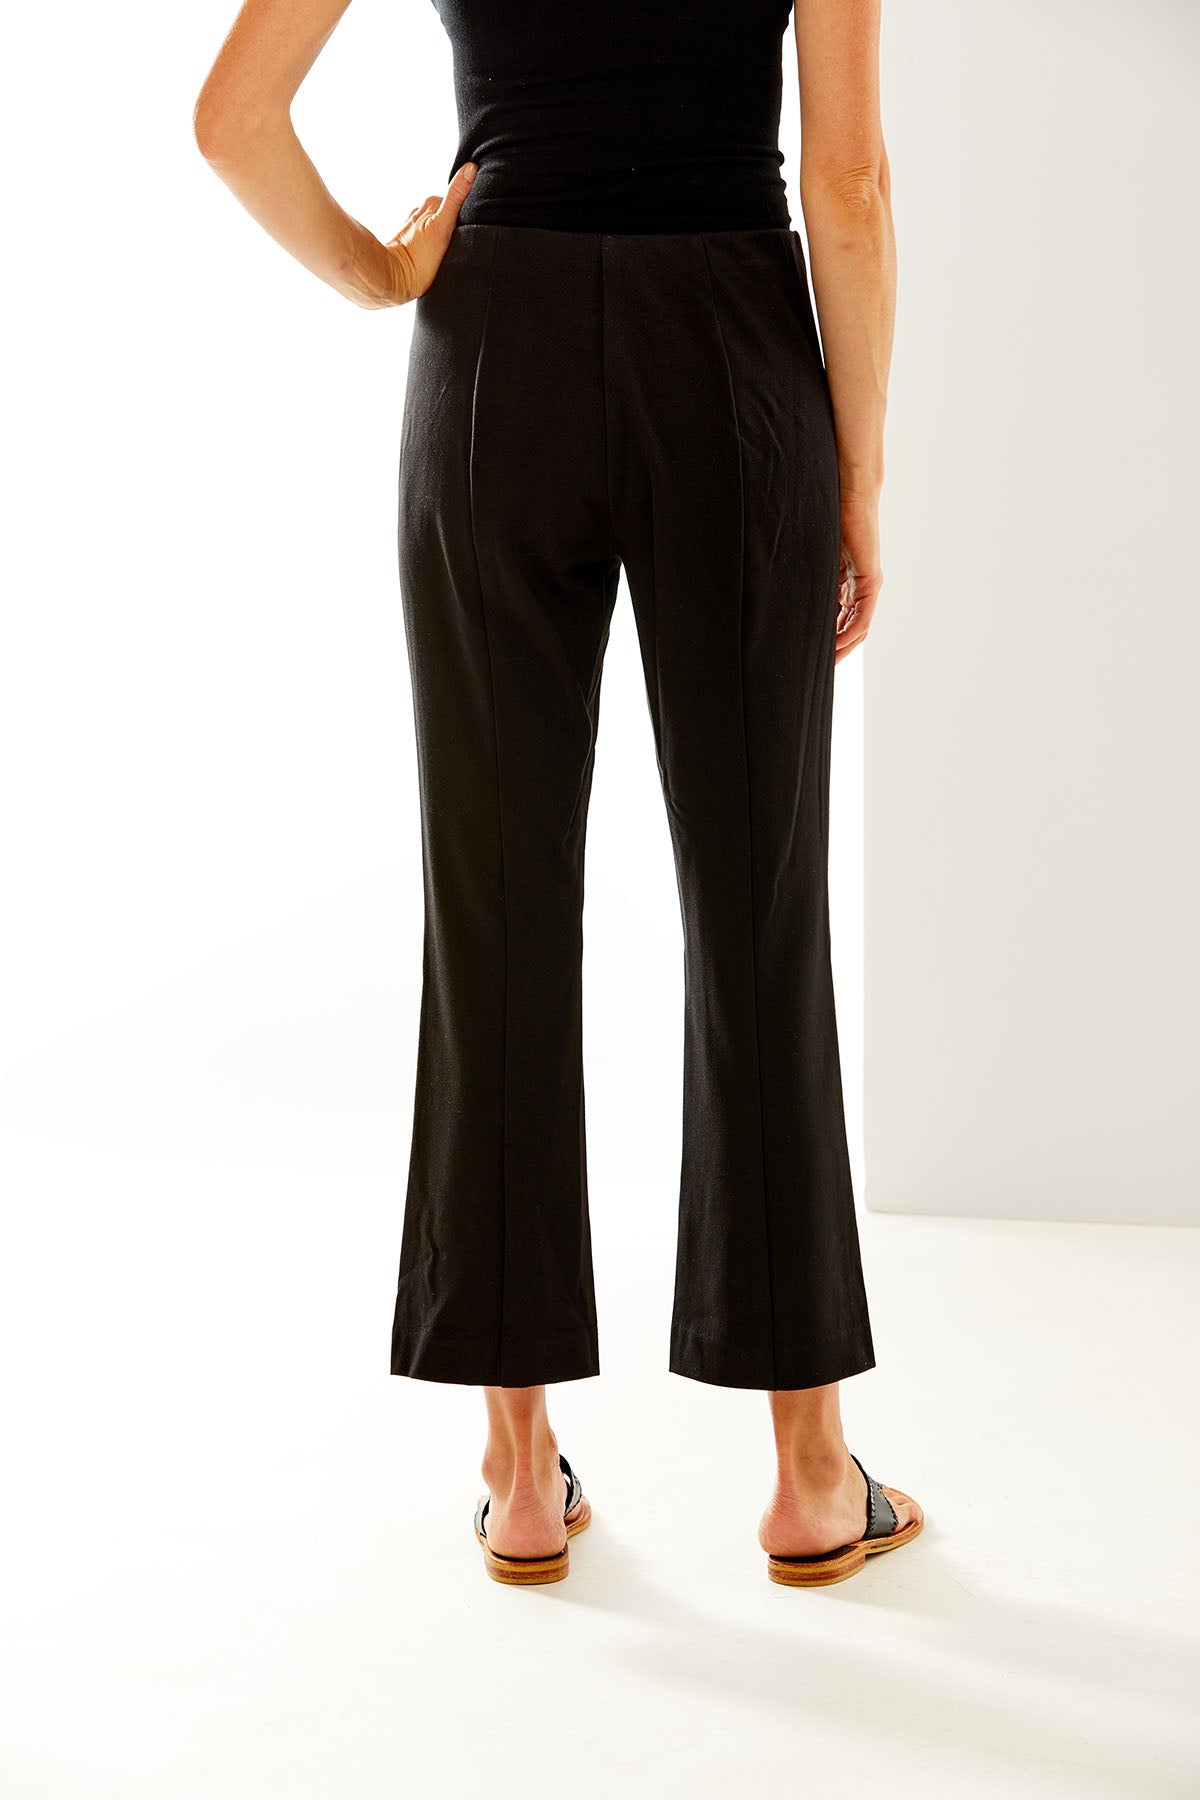 Woman in black cropped pant